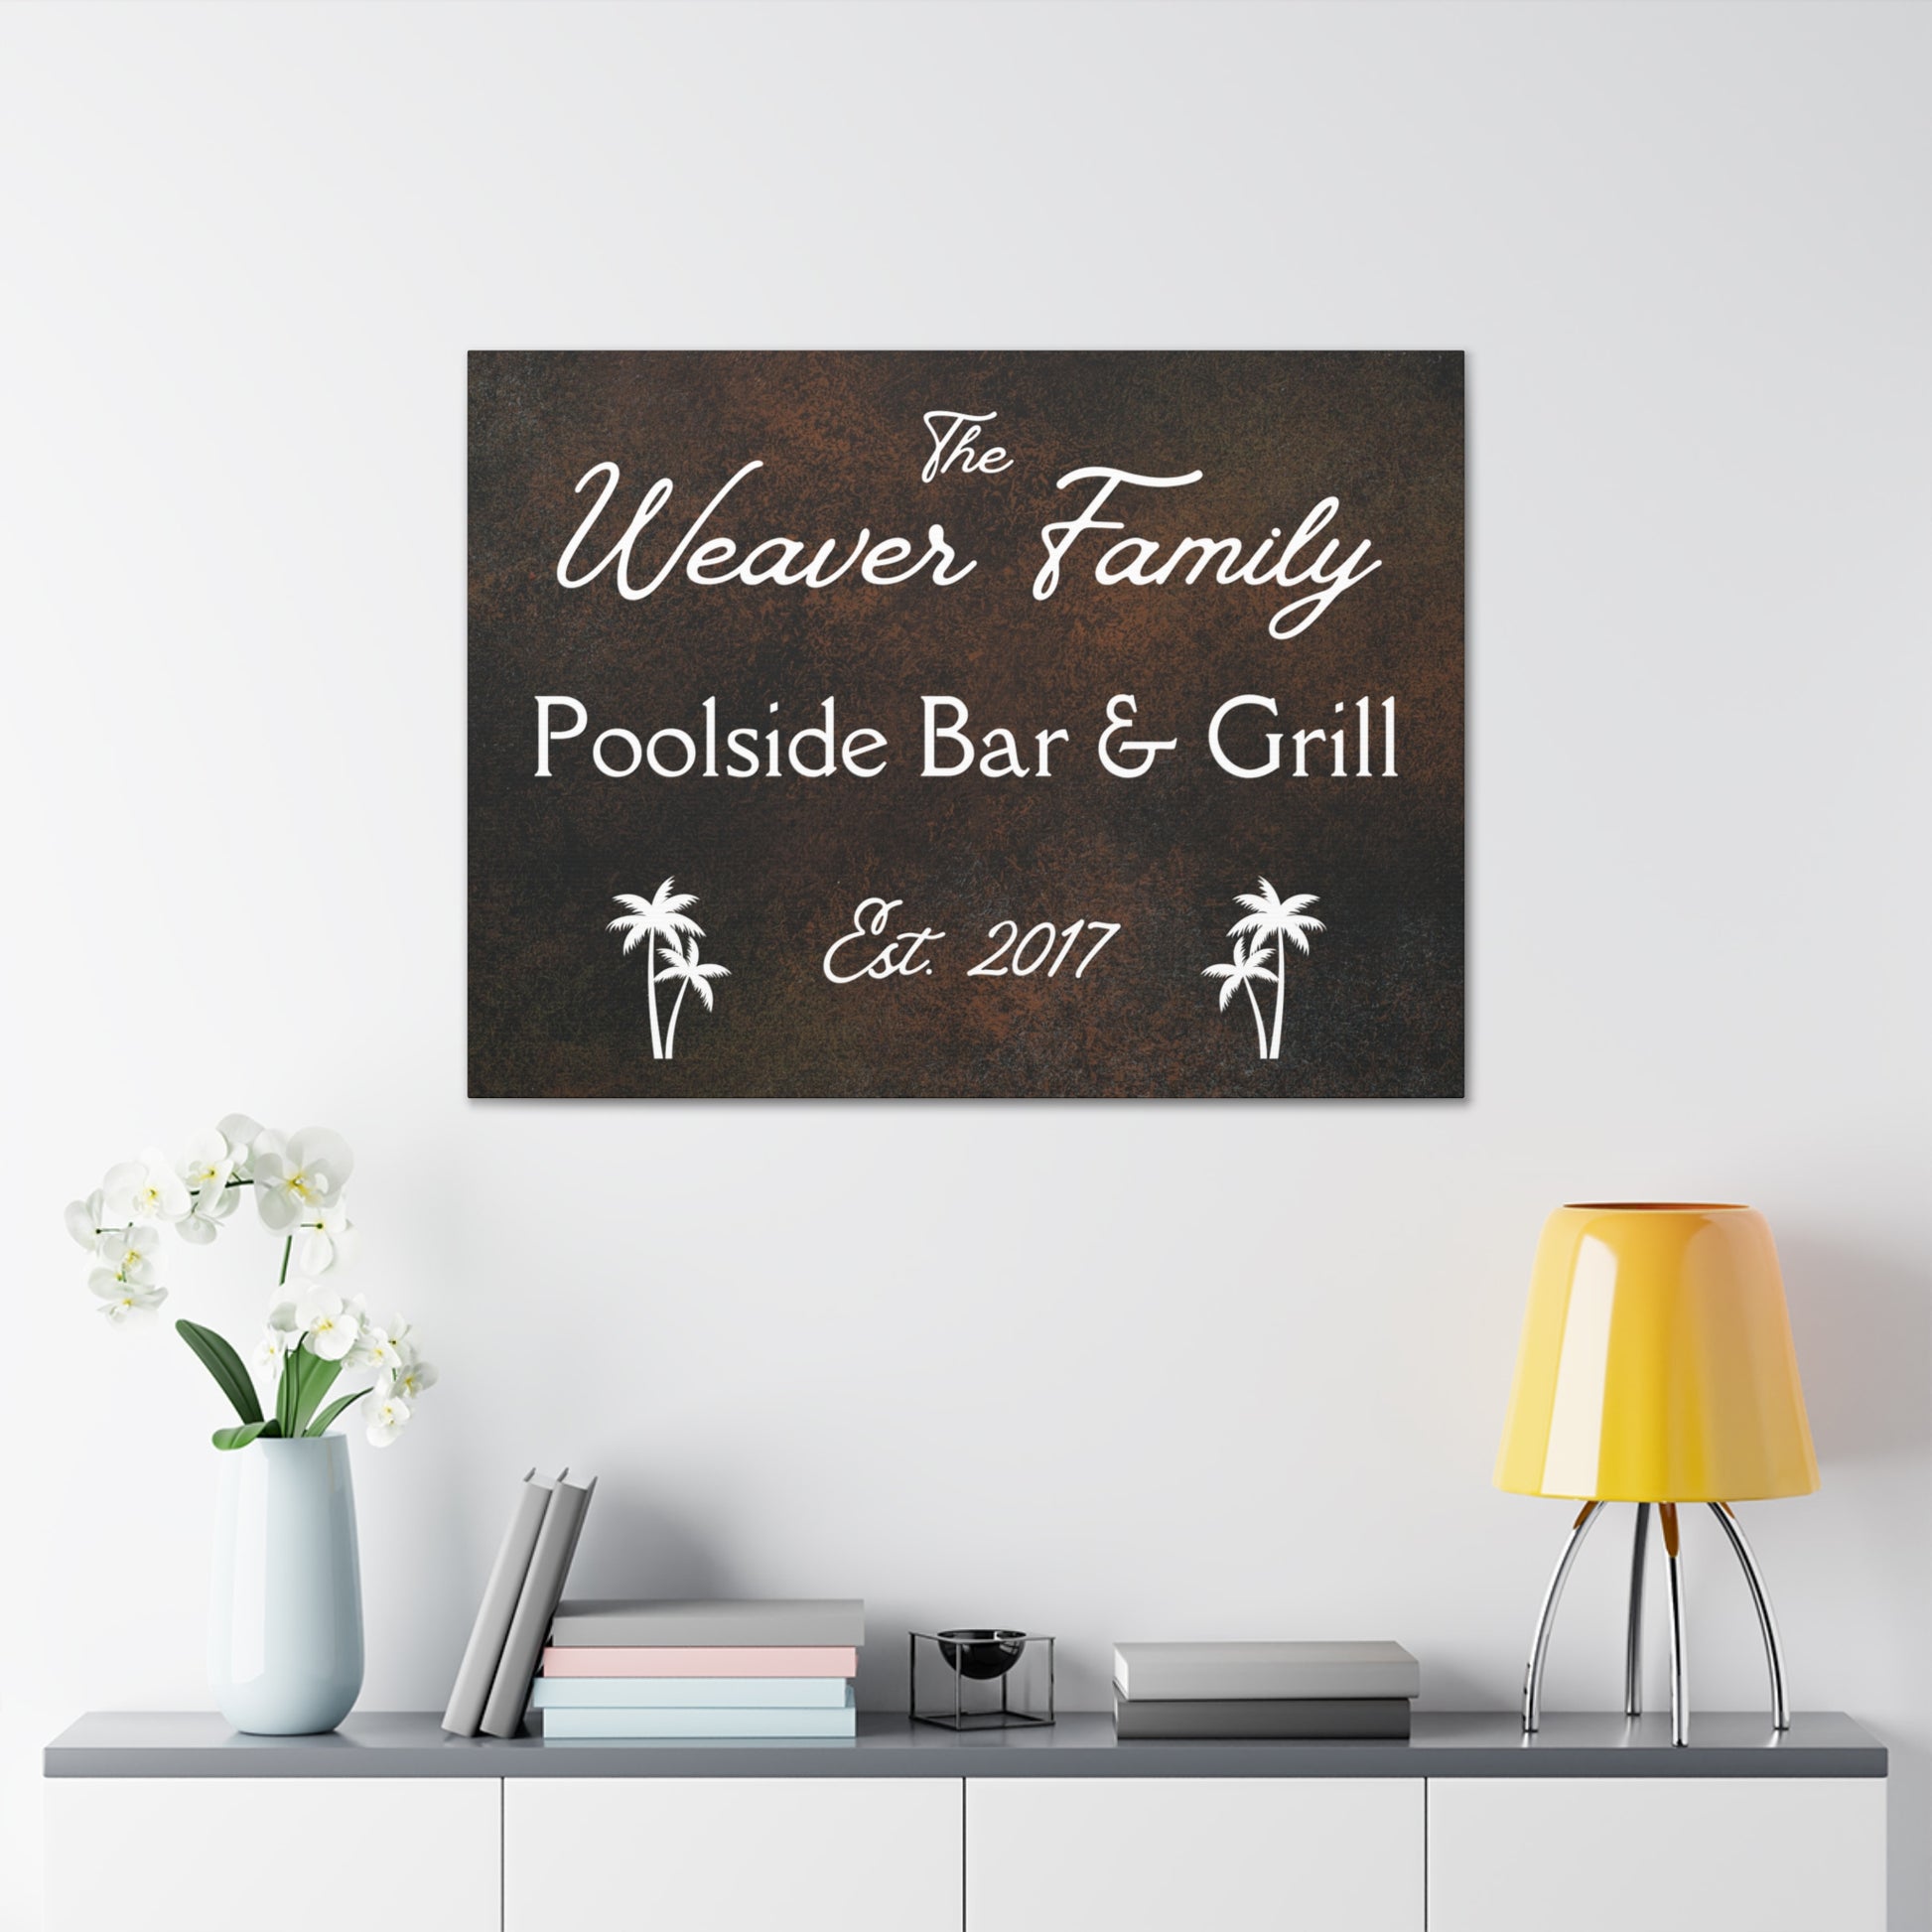 Custom "Poolside Bar & Grill" Wall Art - Weave Got Gifts - Unique Gifts You Won’t Find Anywhere Else!